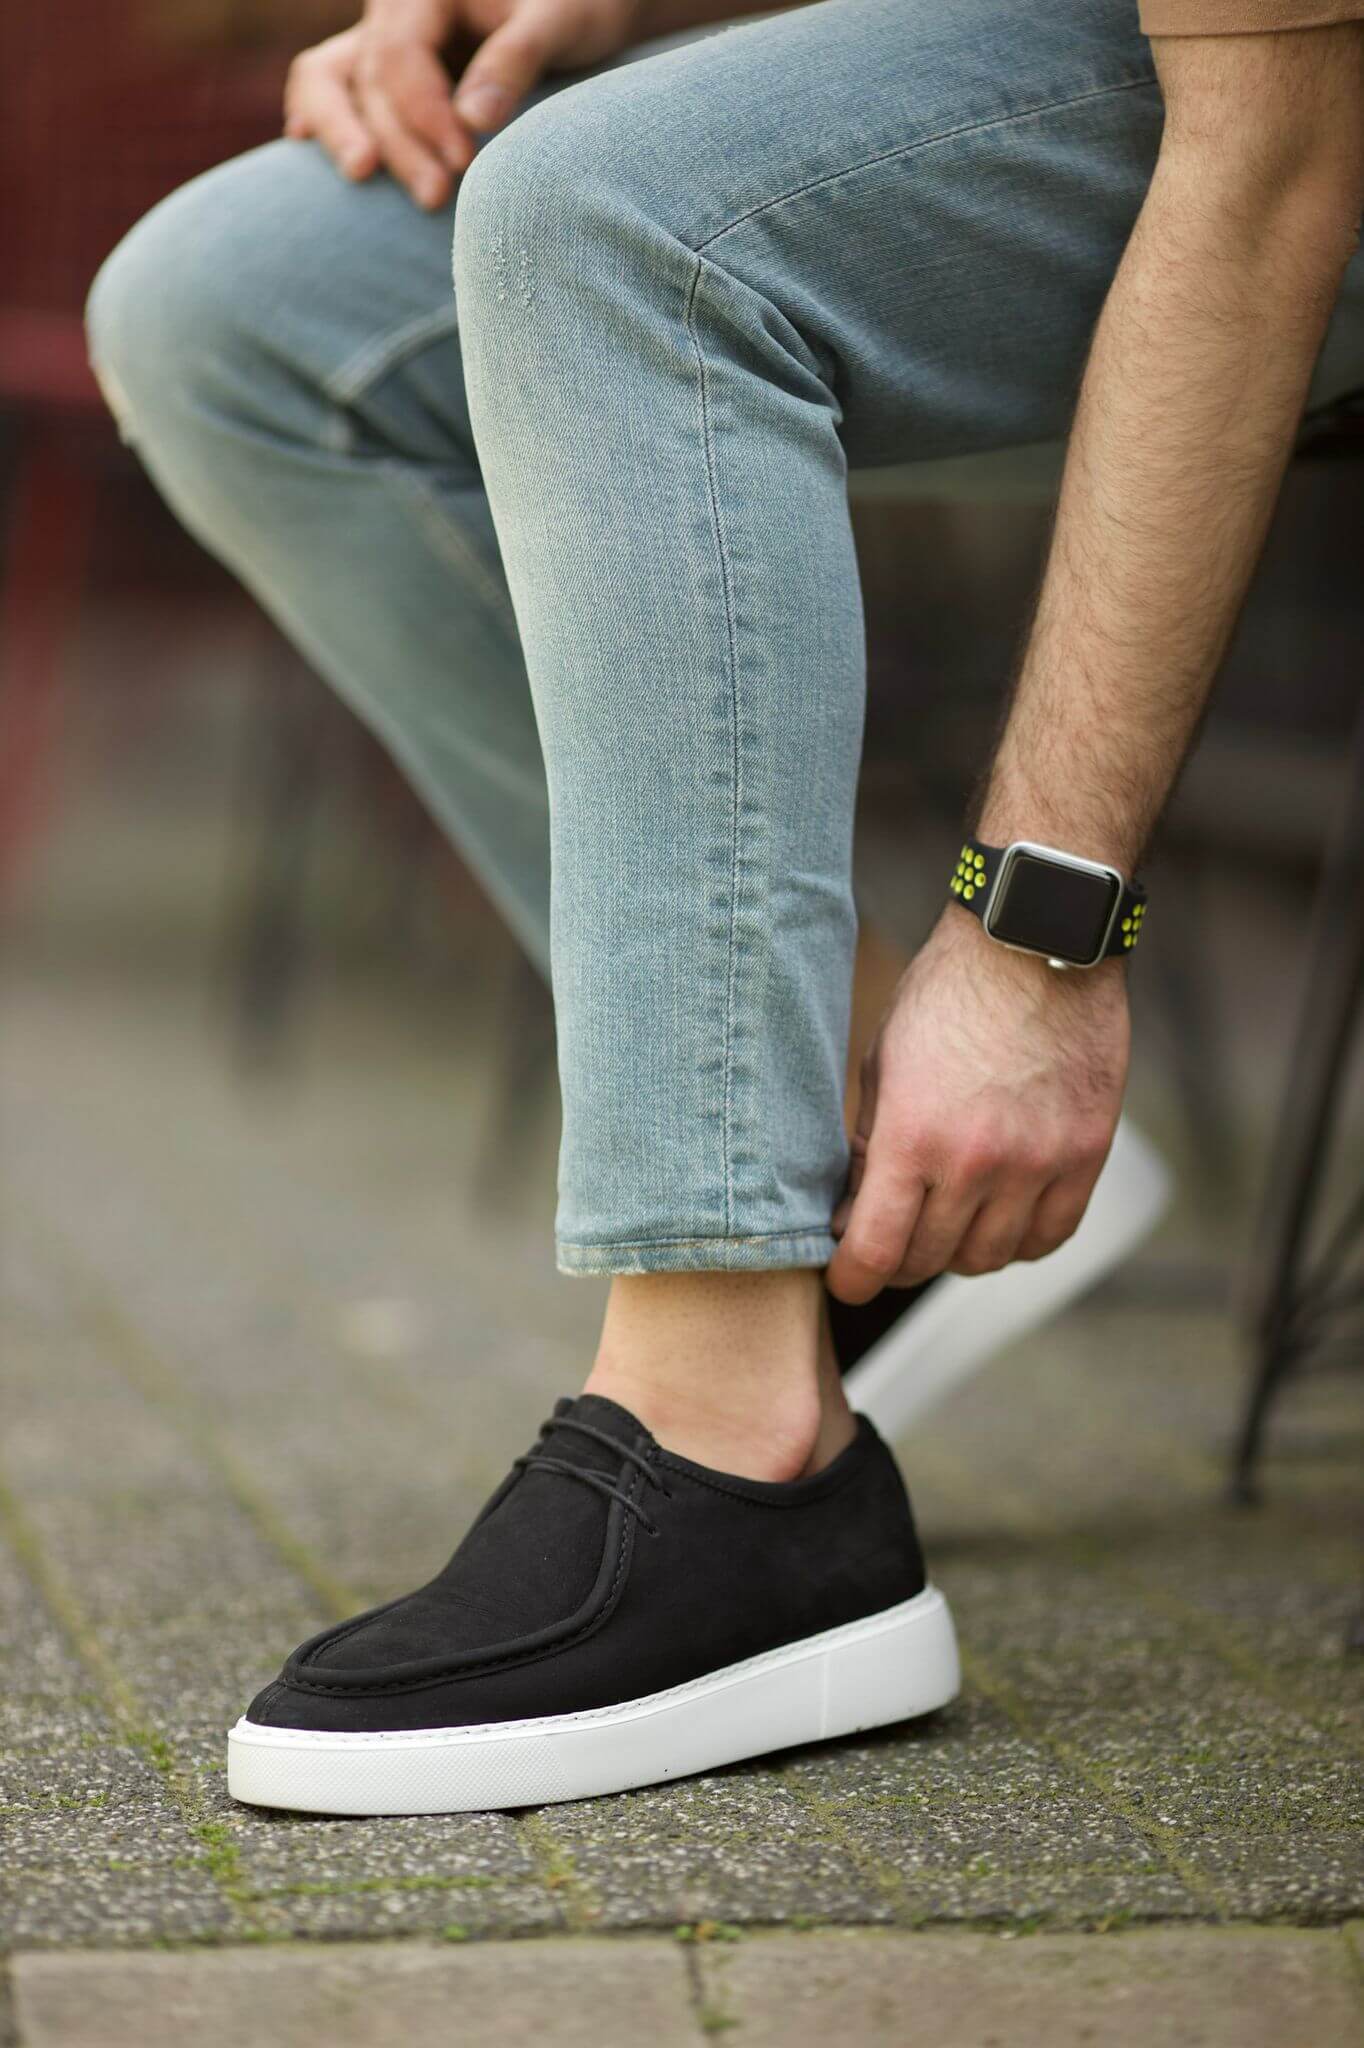 A Black Casual Lace Up on display.